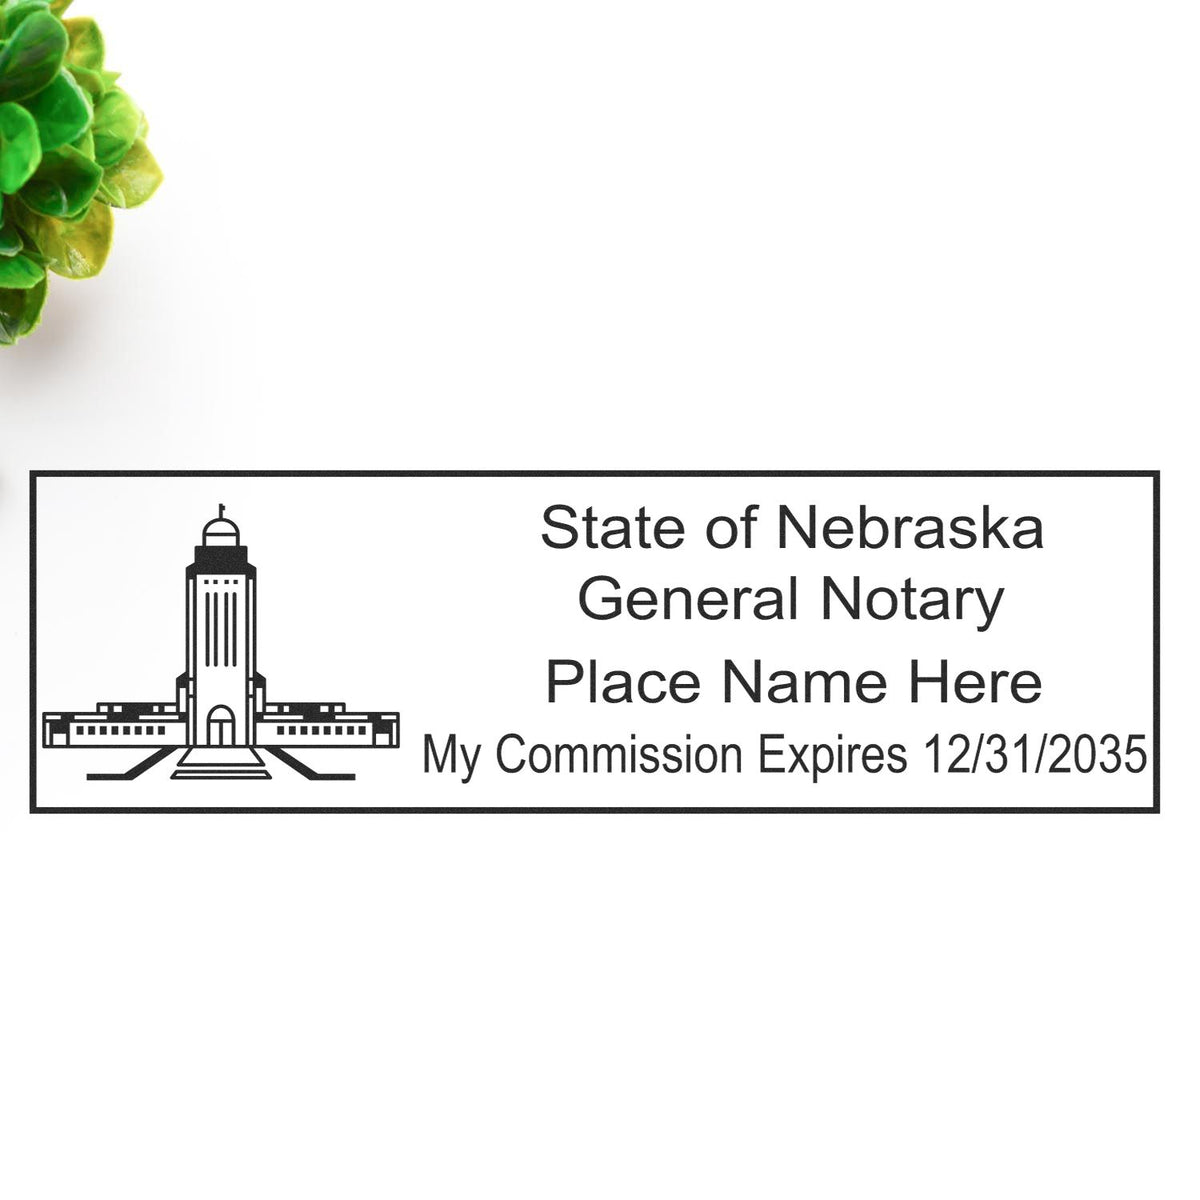 Another Example of a stamped impression of the Heavy-Duty Nebraska Rectangular Notary Stamp on a piece of office paper.